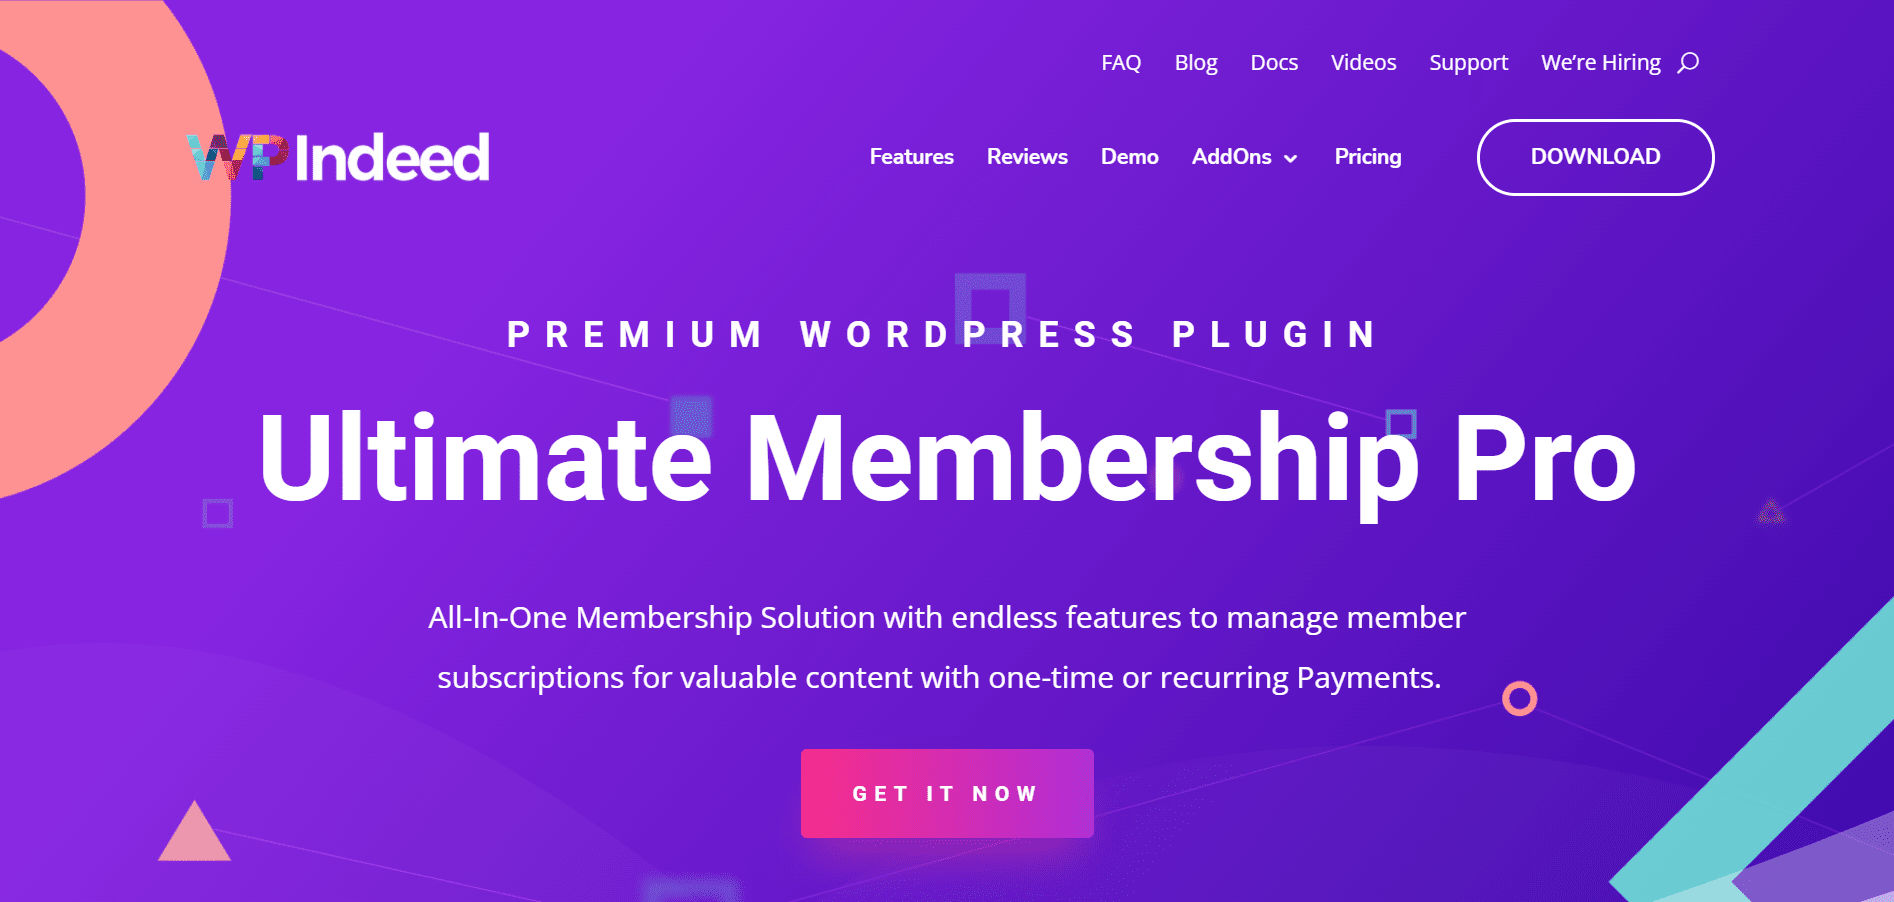 What is Ultimate Membership Pro